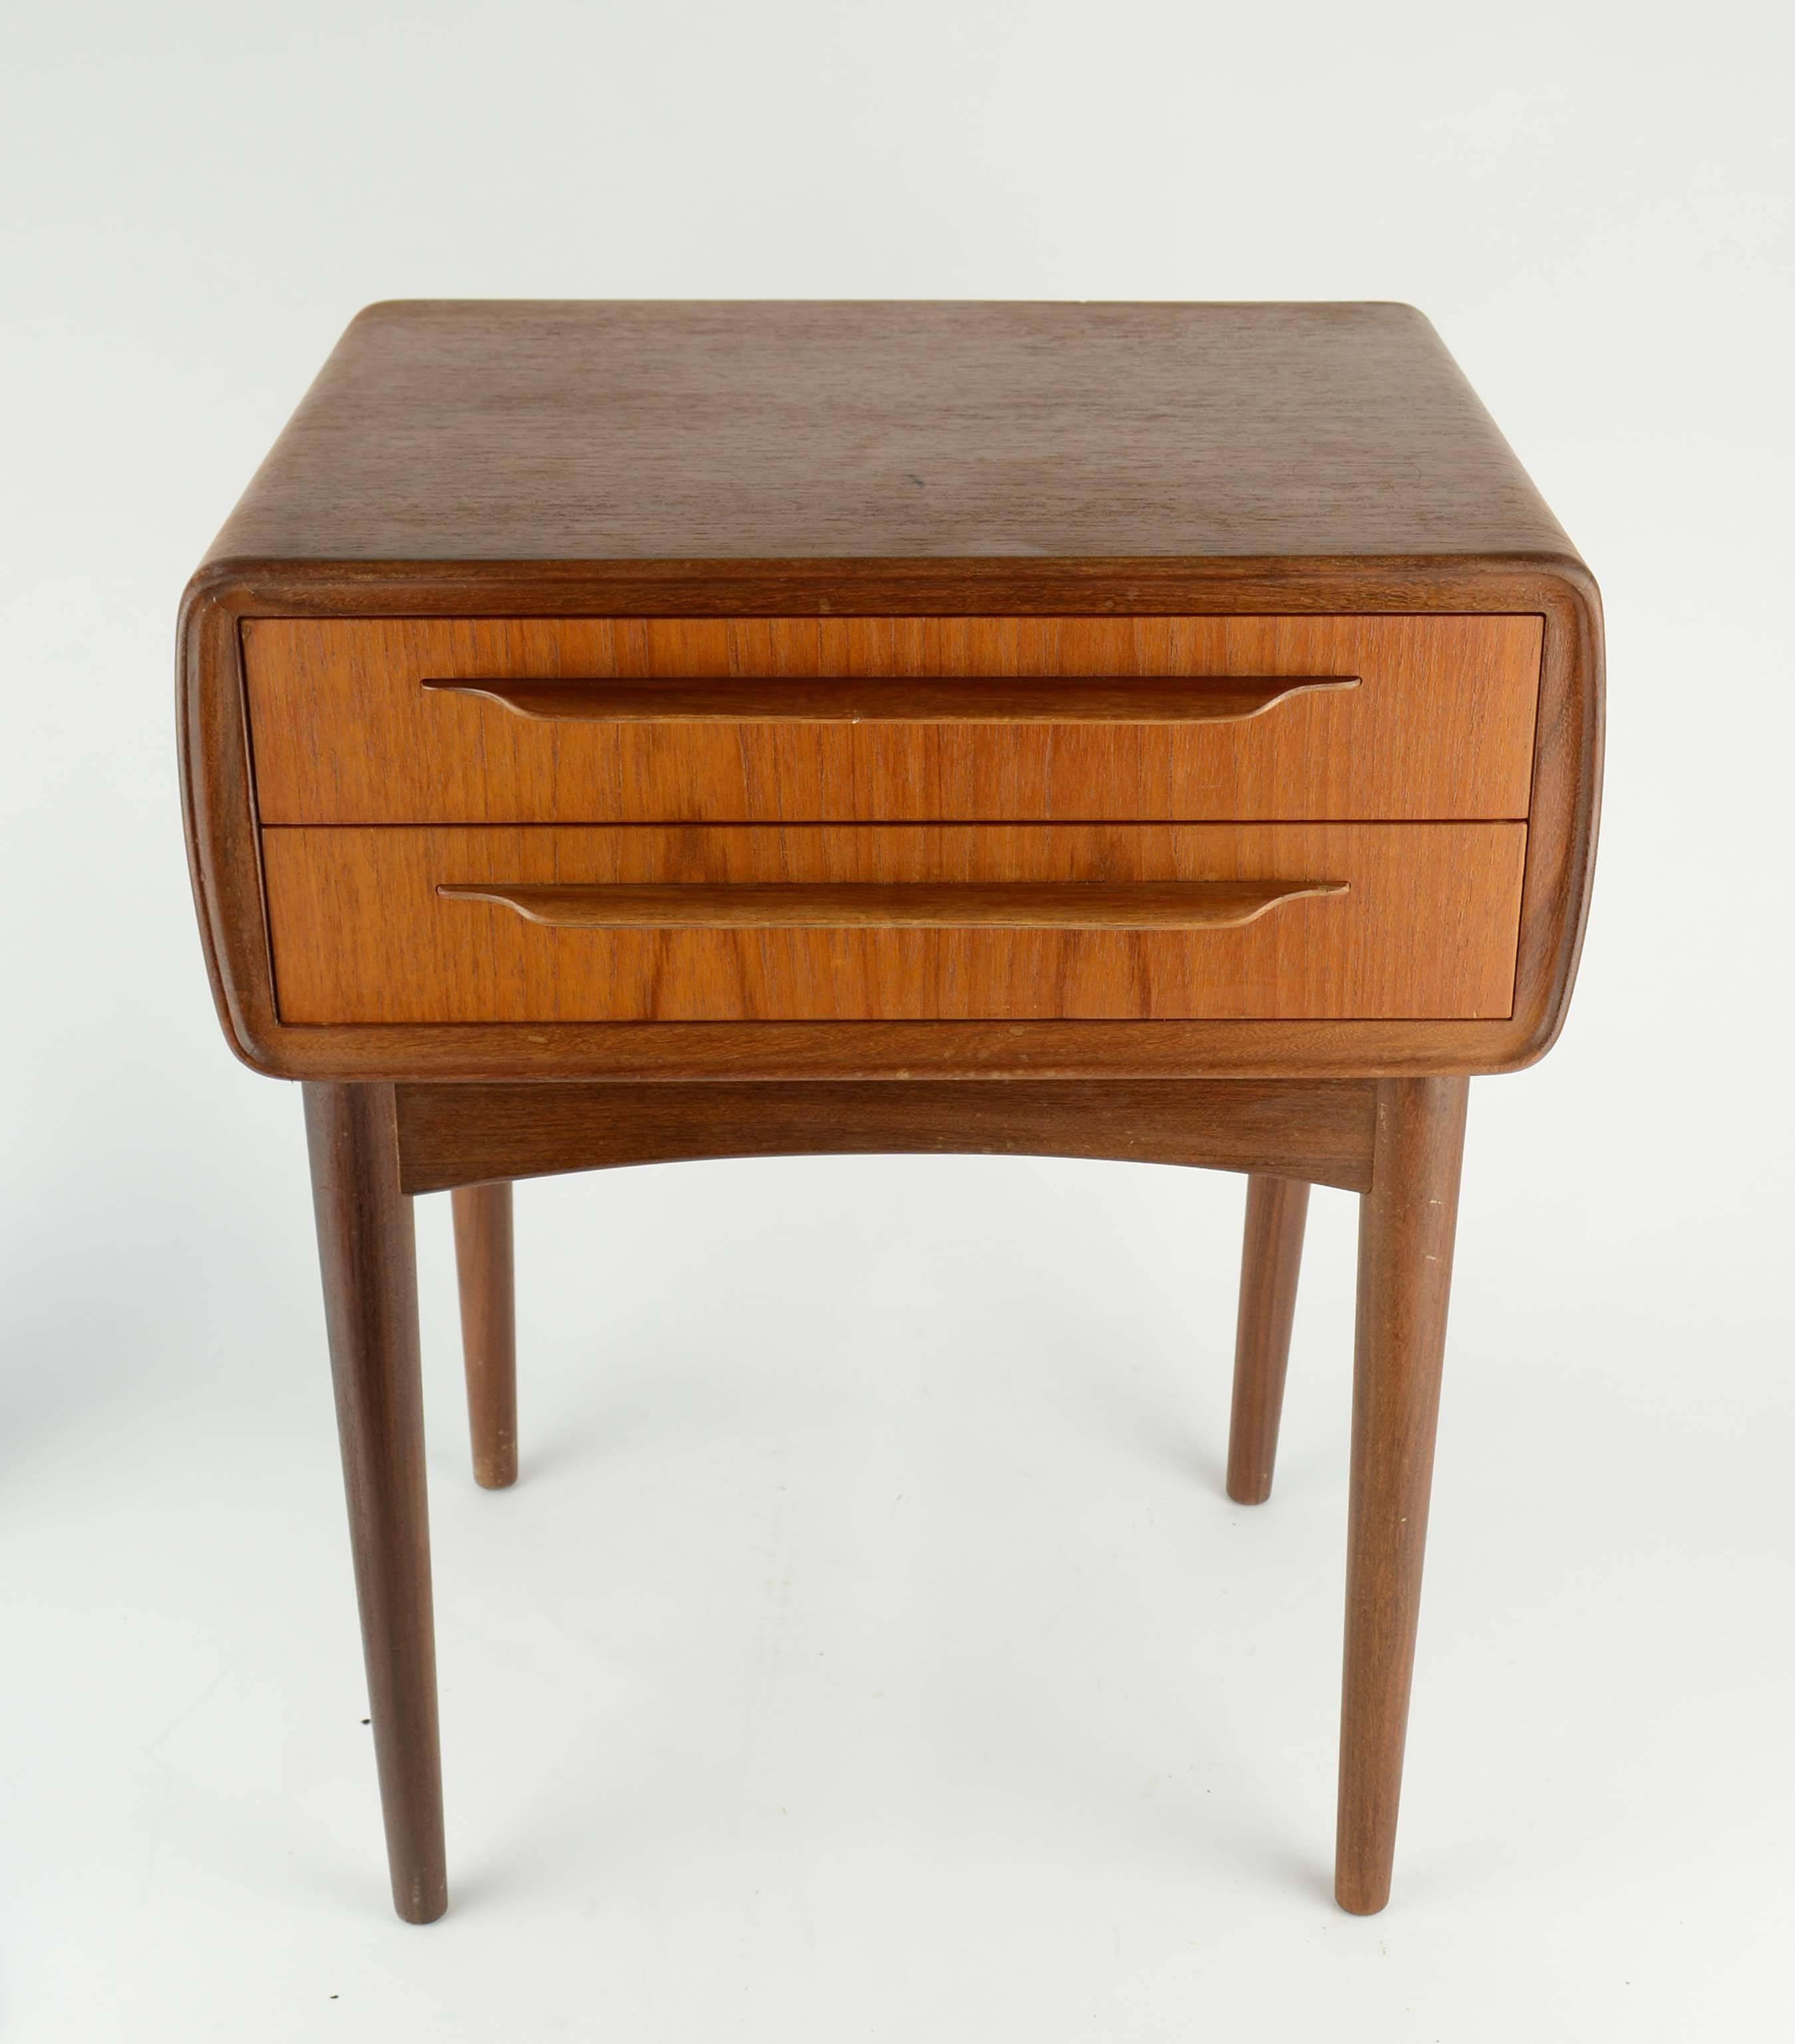 A teak nightstand designed by Johannes Andersen for CFC Silkeborg, Denmark, 1960s.

Andersen’s career paralleled the Mid-Century’s growing appreciation for Danish furniture designs, attracting international acclaim.  He worked steadily for his own